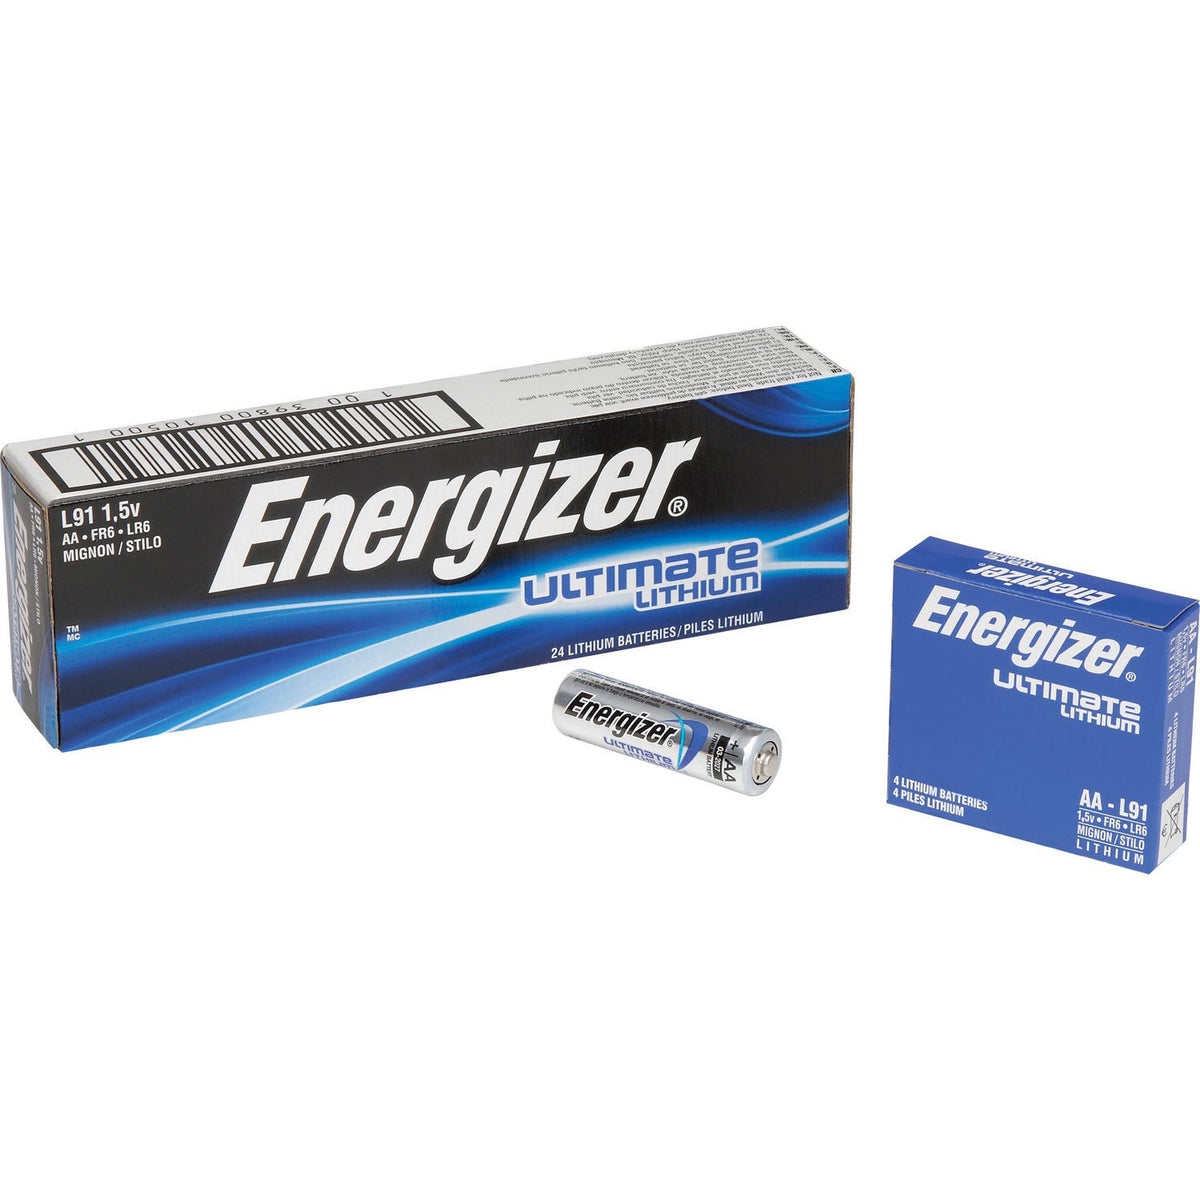 Ultimate Lithium AA Batteries by Energizer® EVEL91